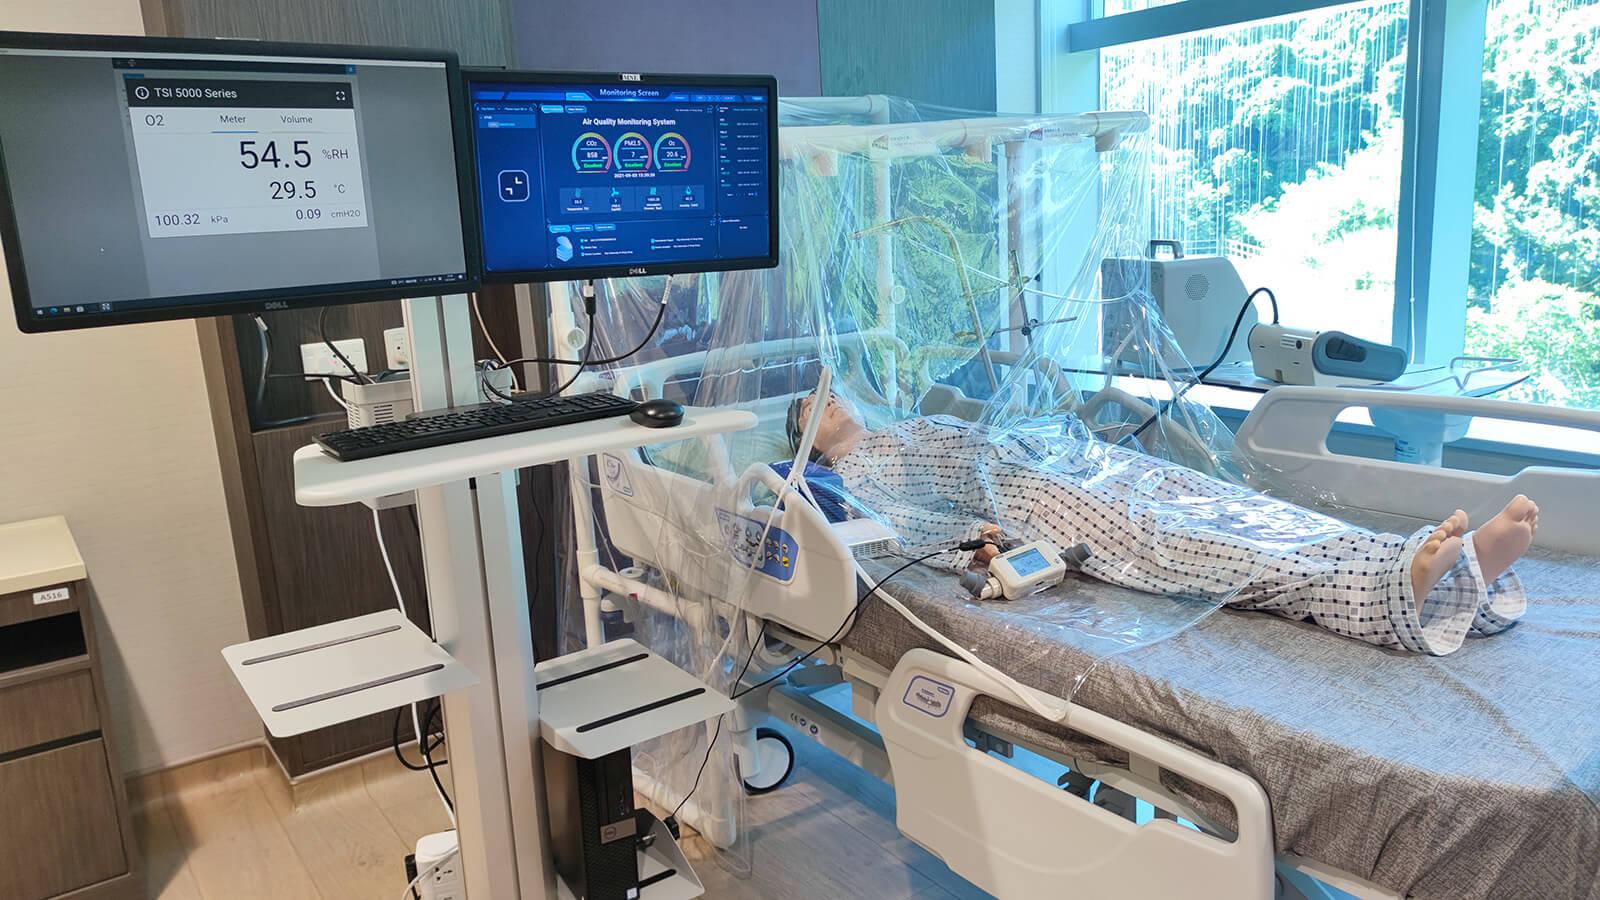 Fast-track Vented Enclosure System for COVID-19 Patient Wards